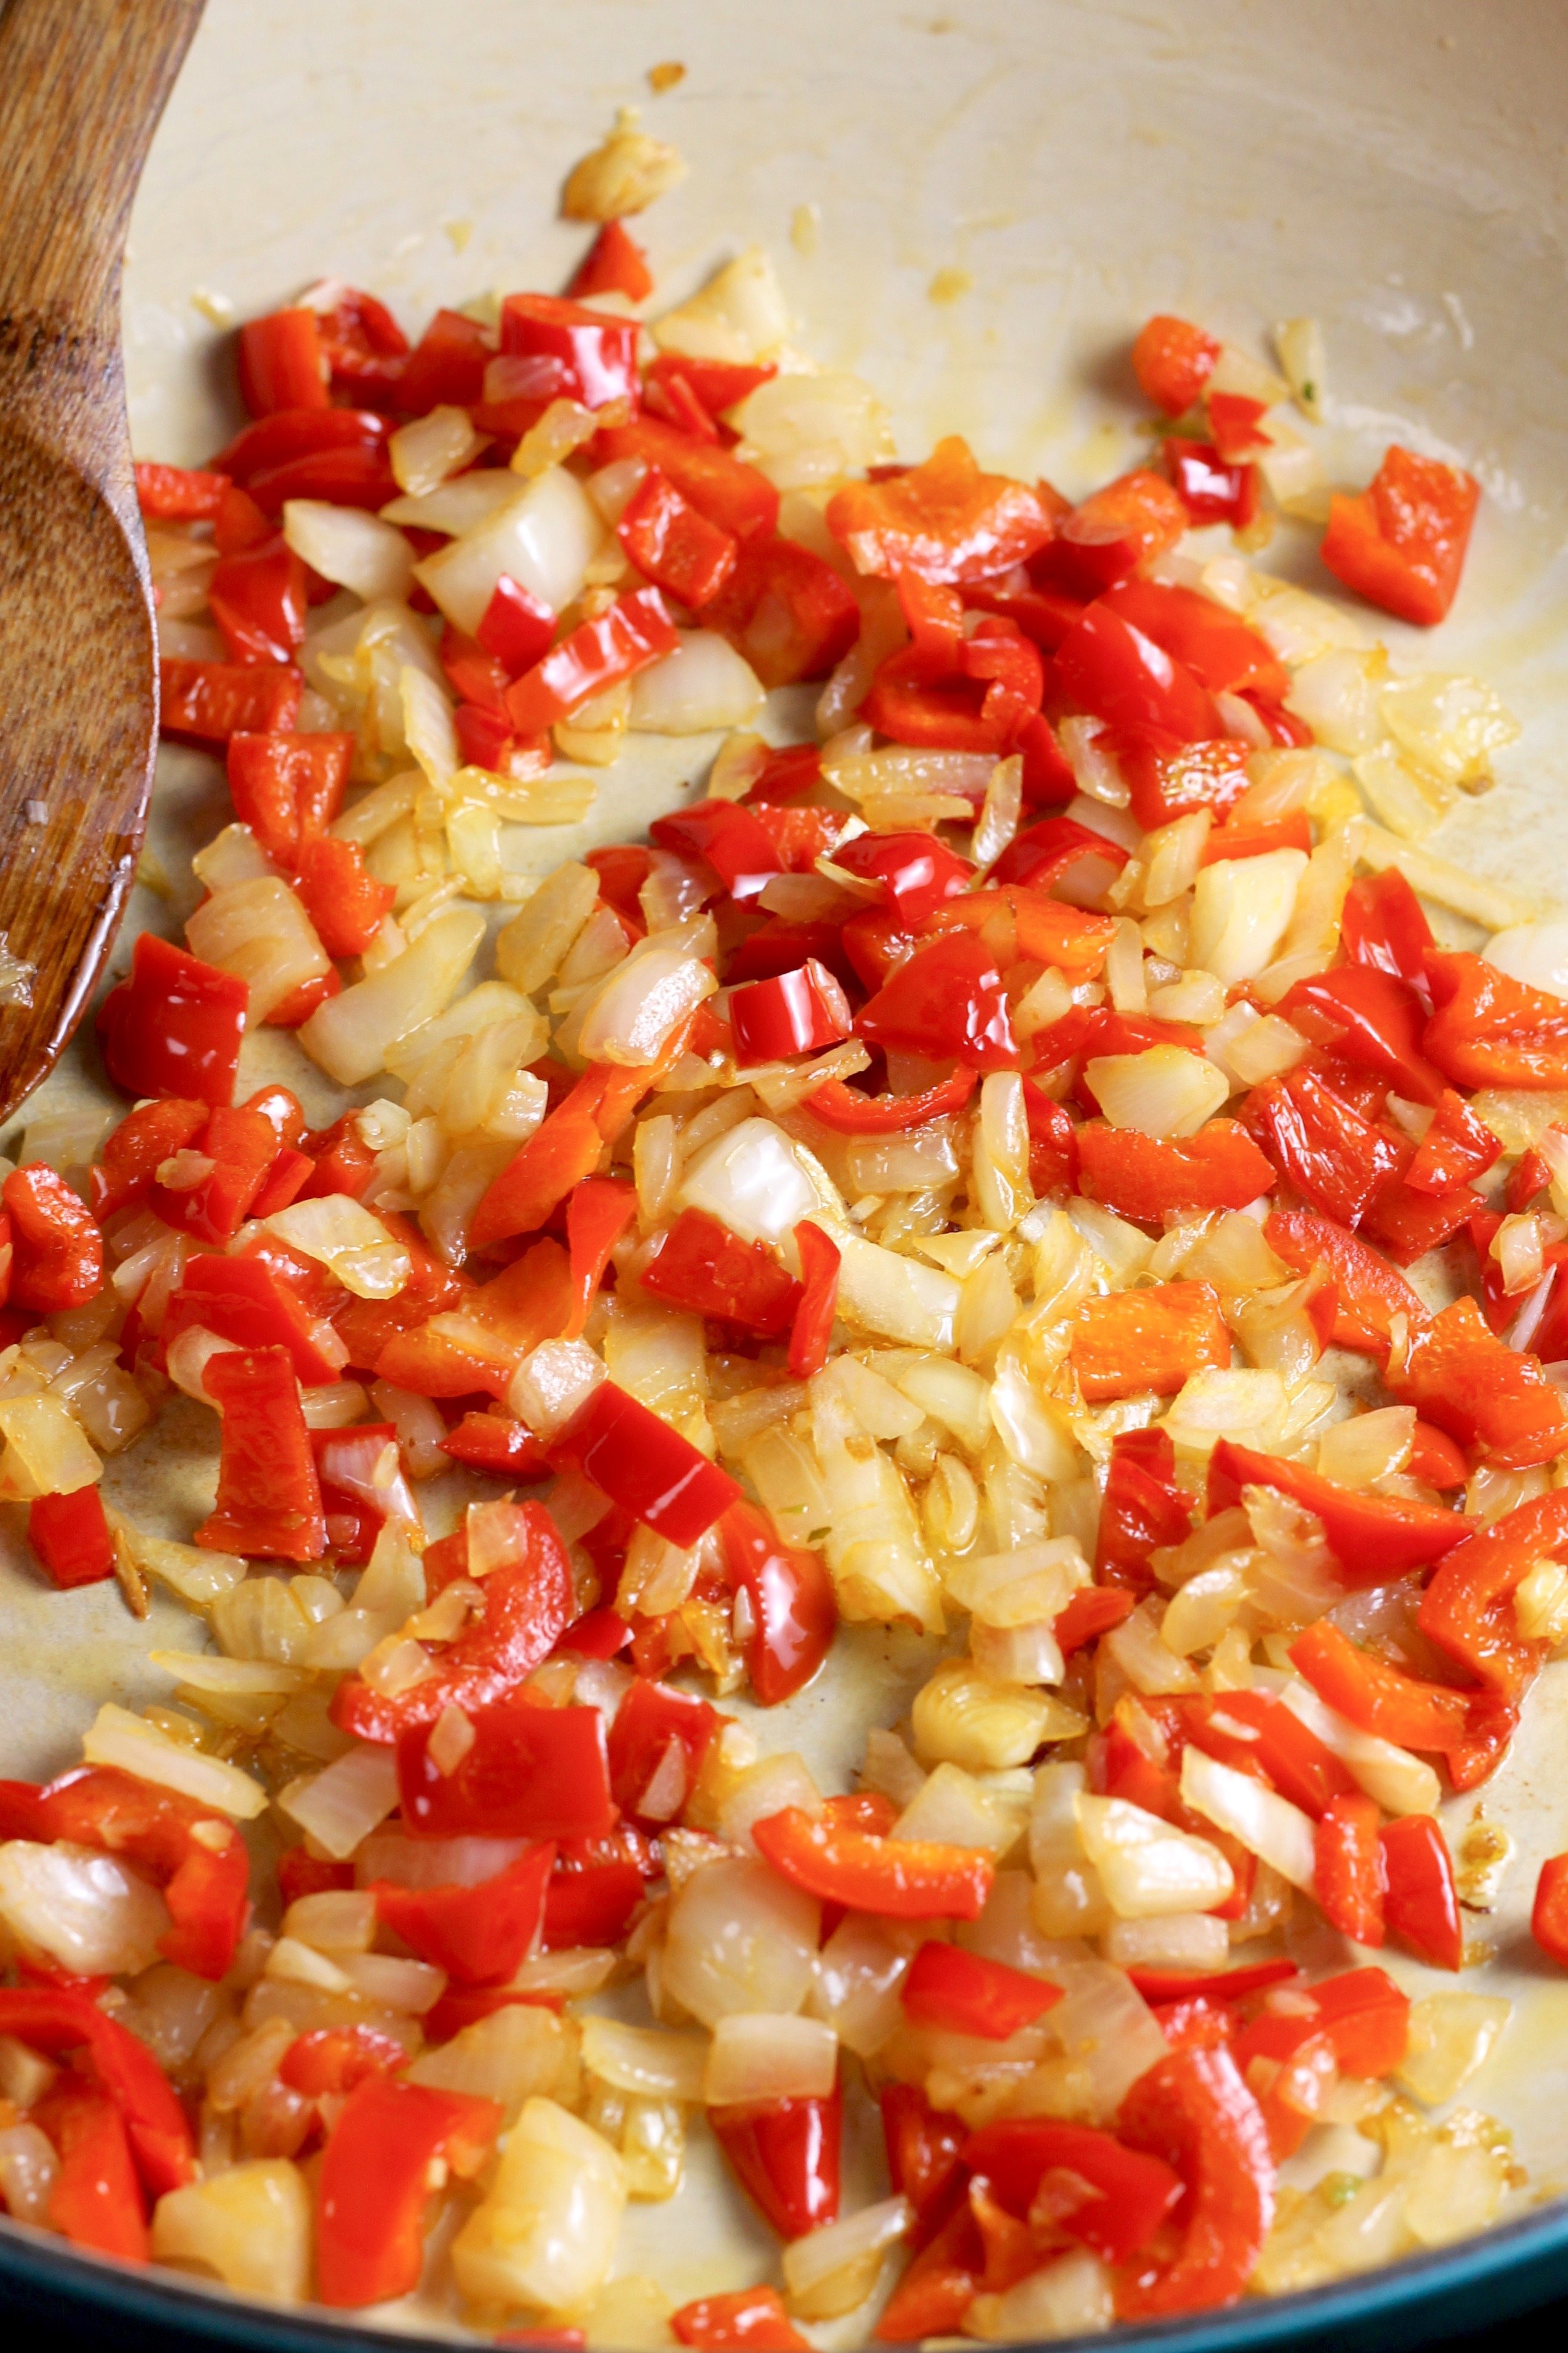 Onions, Garlic, Red Peppers for Smoked Chicken Chili